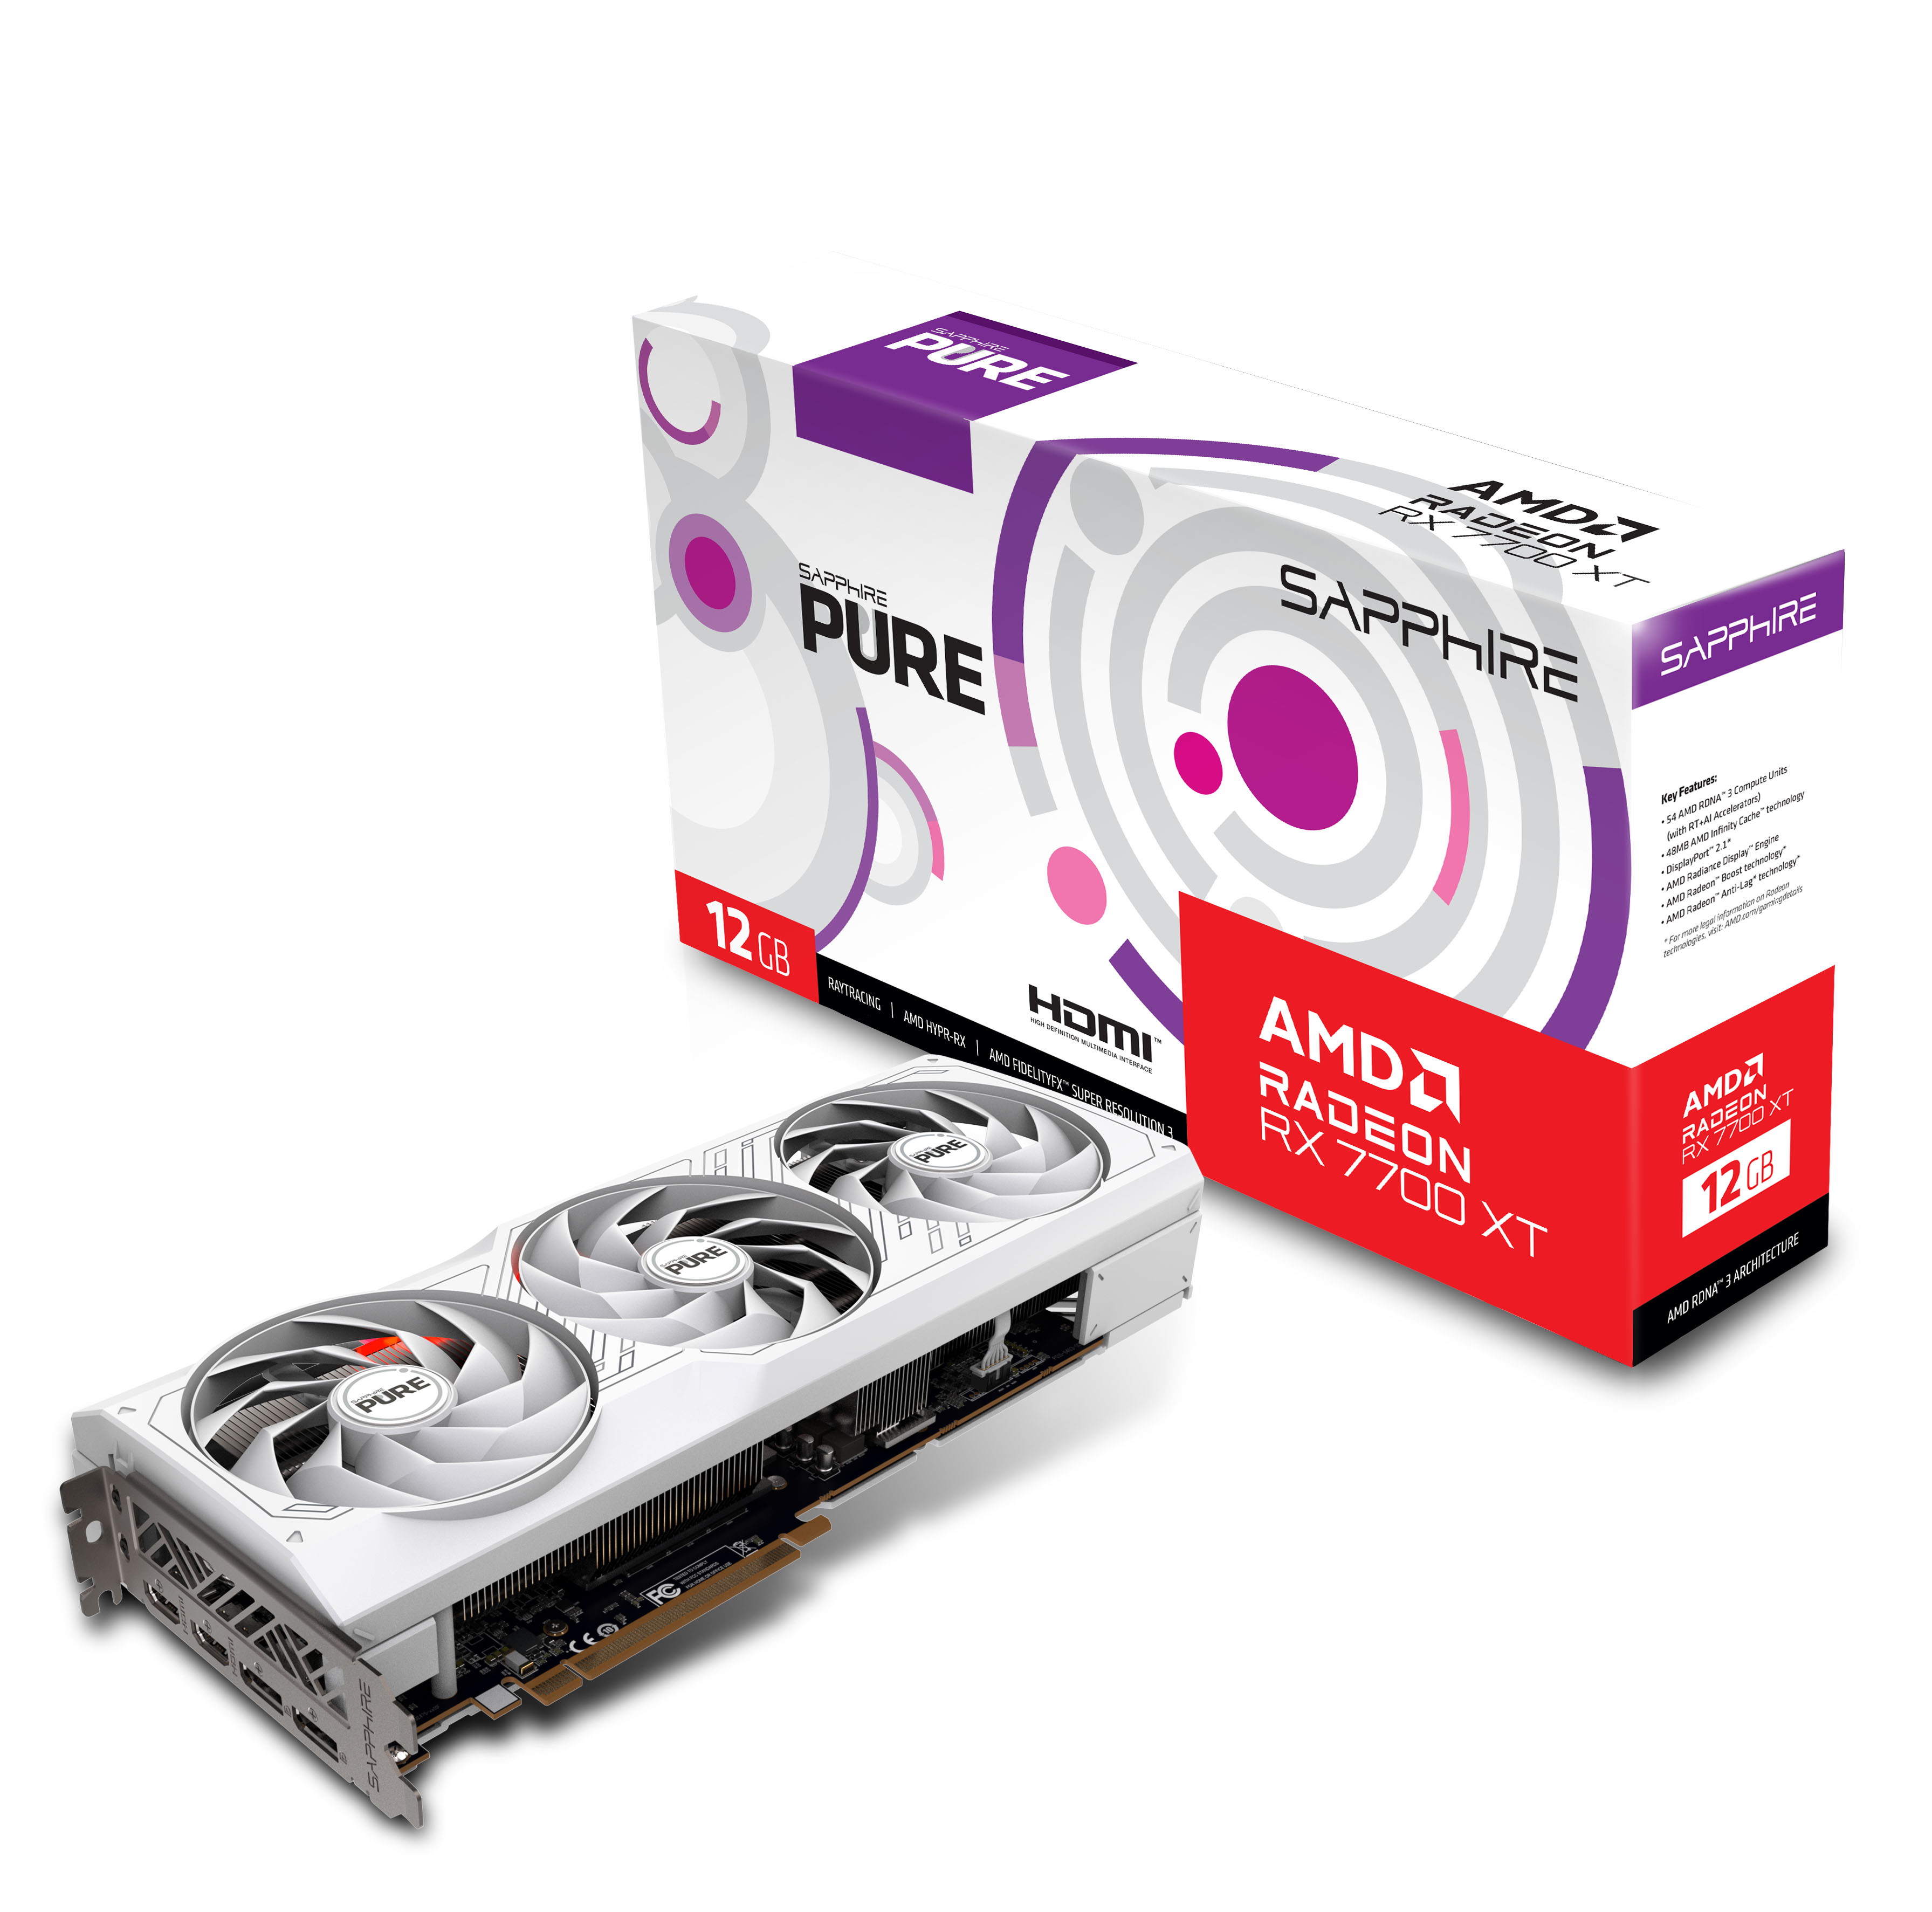 Sapphire - SAPPHIRE PURE AMD Radeon™ RX 7700 XT Gaming Graphics Card with 12GB GDDR6, AMD RDNA™ 3 architecture